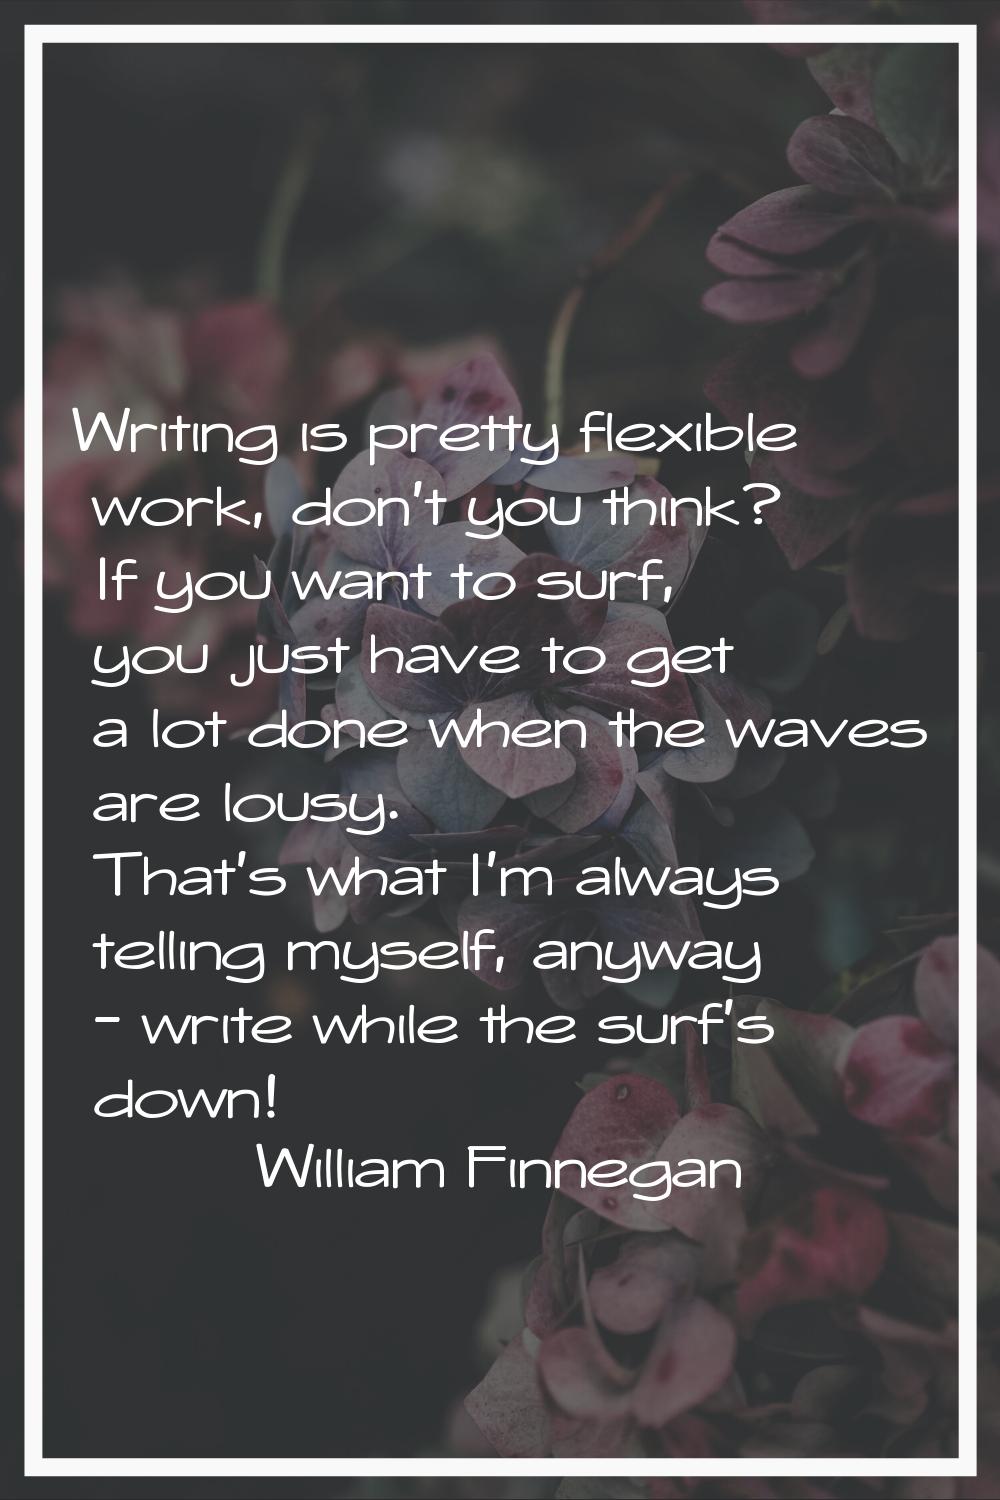 Writing is pretty flexible work, don't you think? If you want to surf, you just have to get a lot d